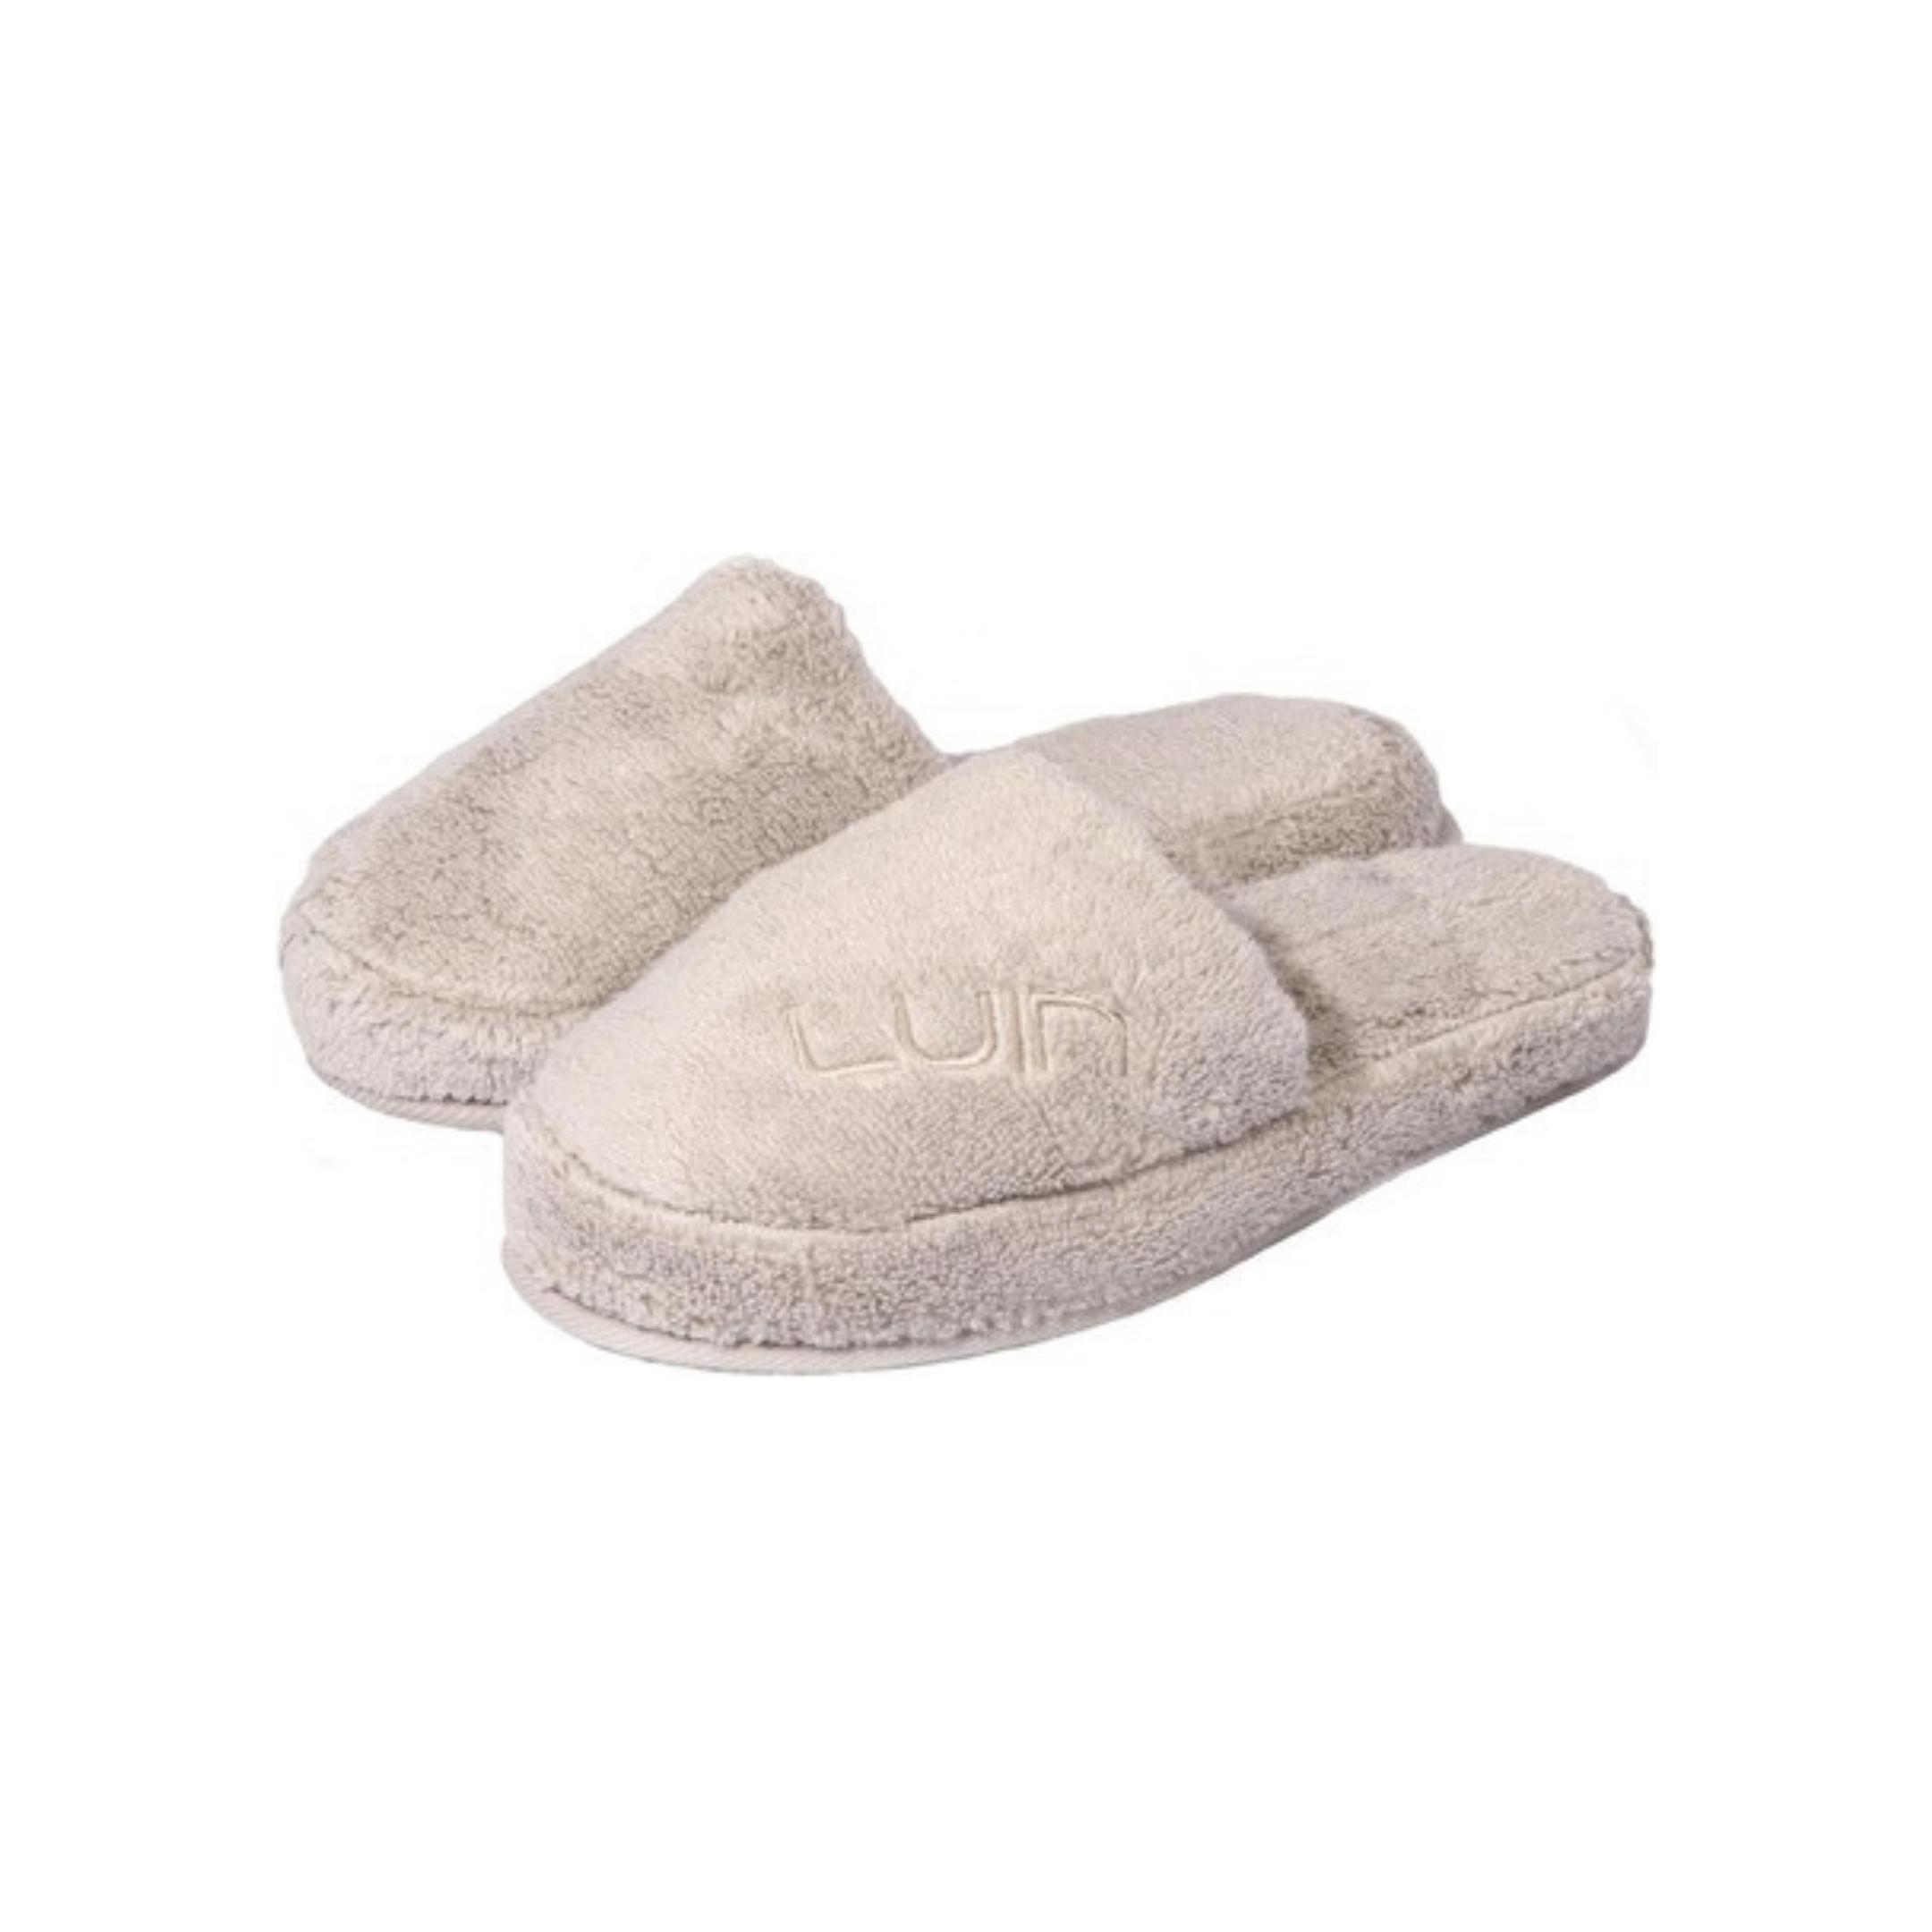 Cosy bath slippers S/M 37-40 sand Luin Living Your Home Your Spa